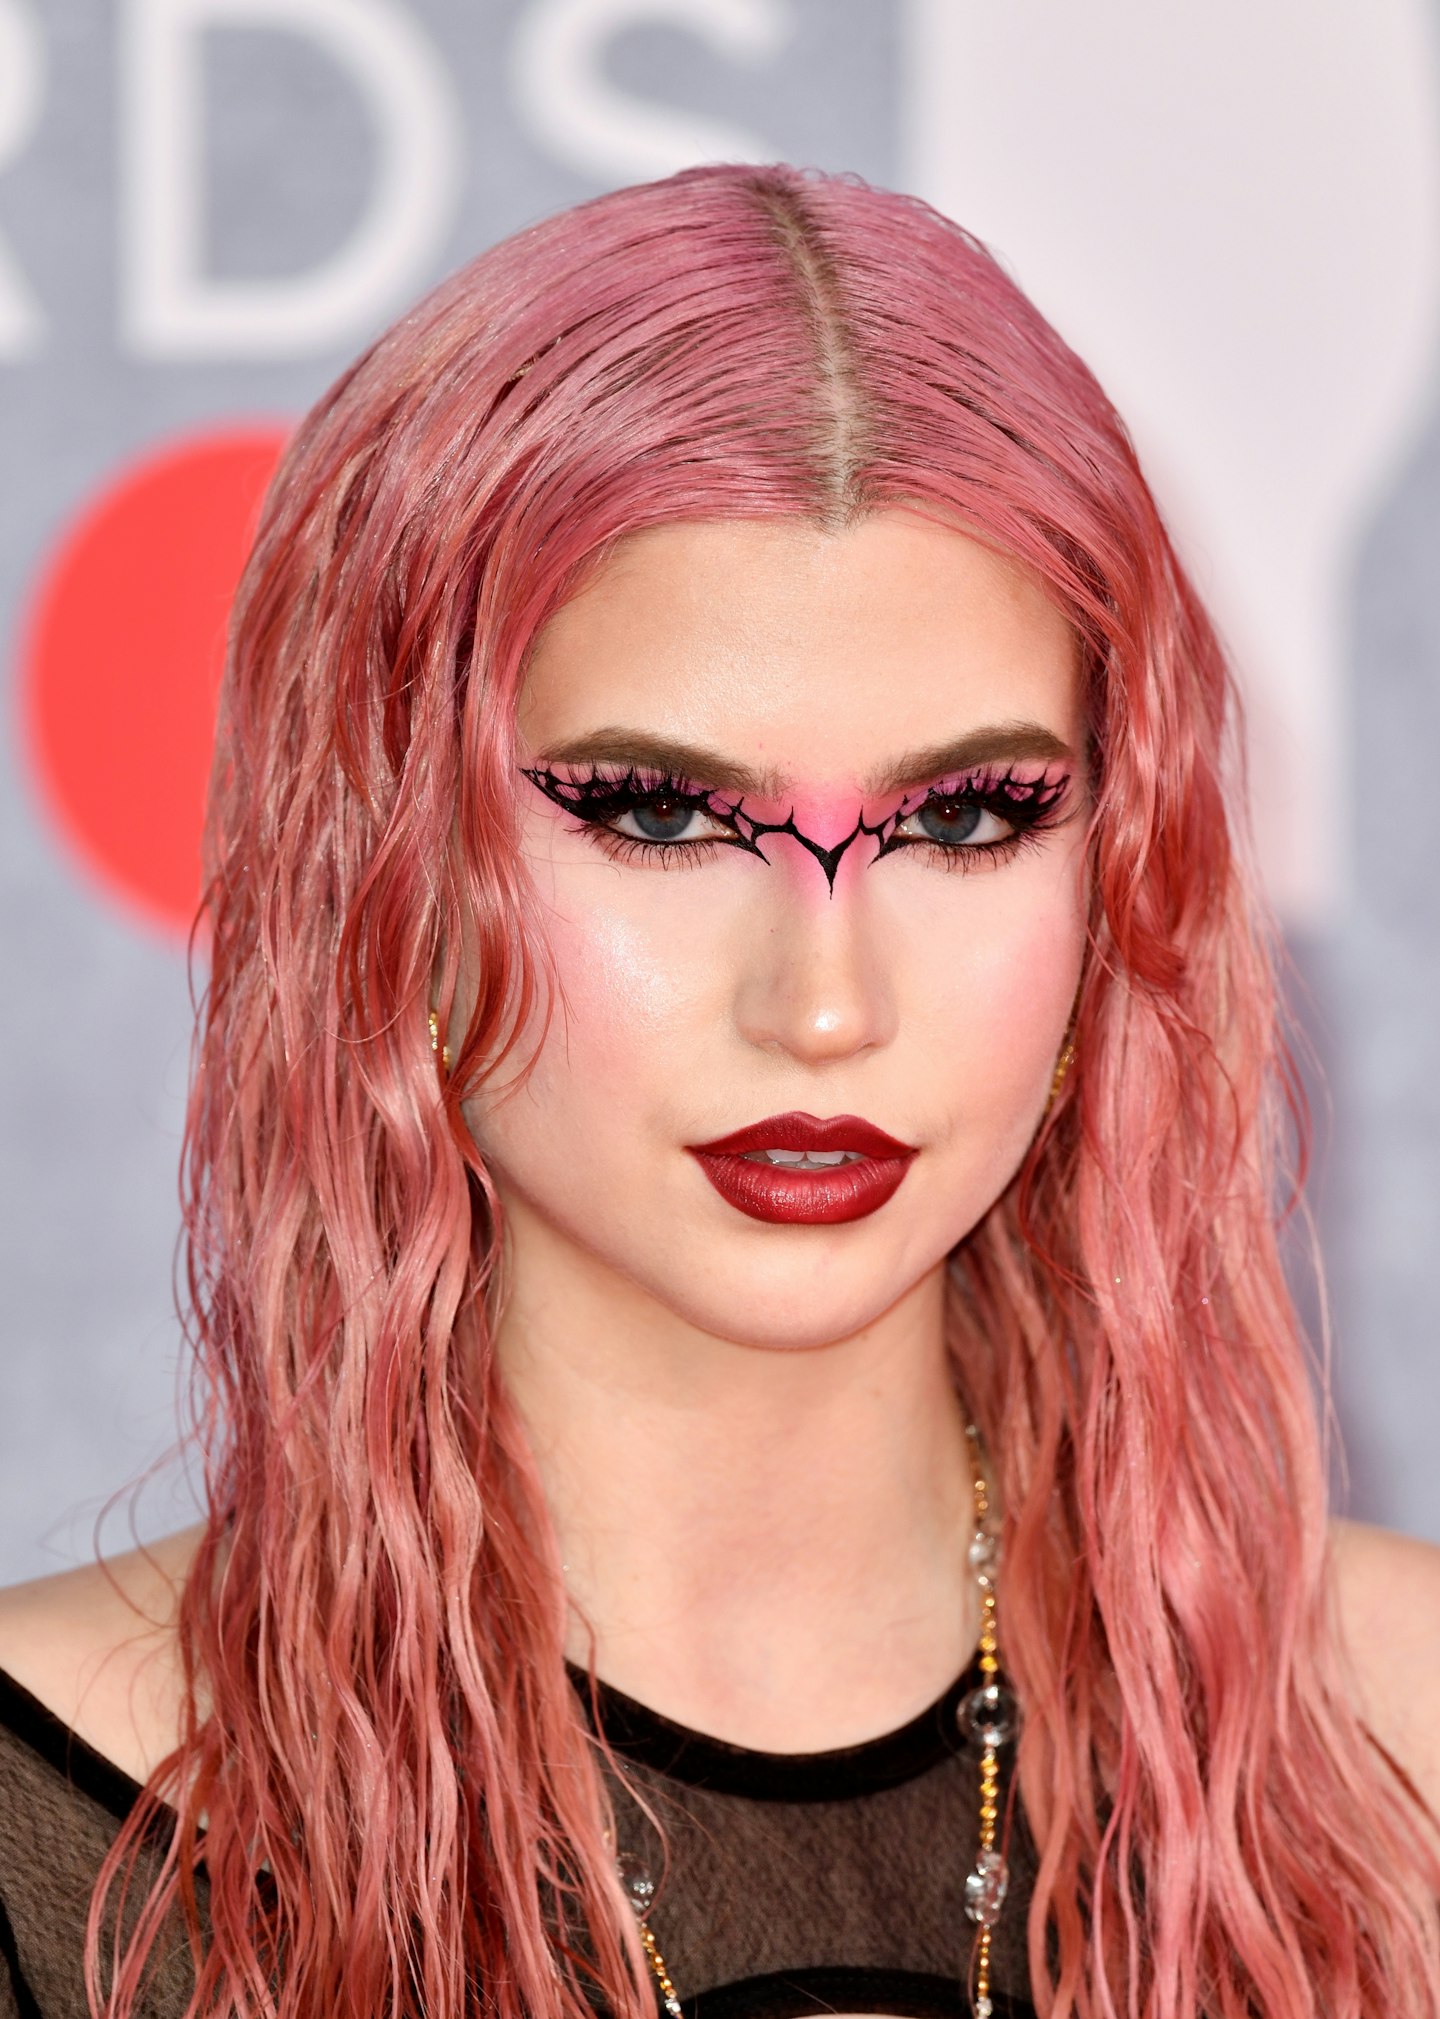 20 Pink Hair Color Ideas for 2022 - Pink Hair Dye Inspiration